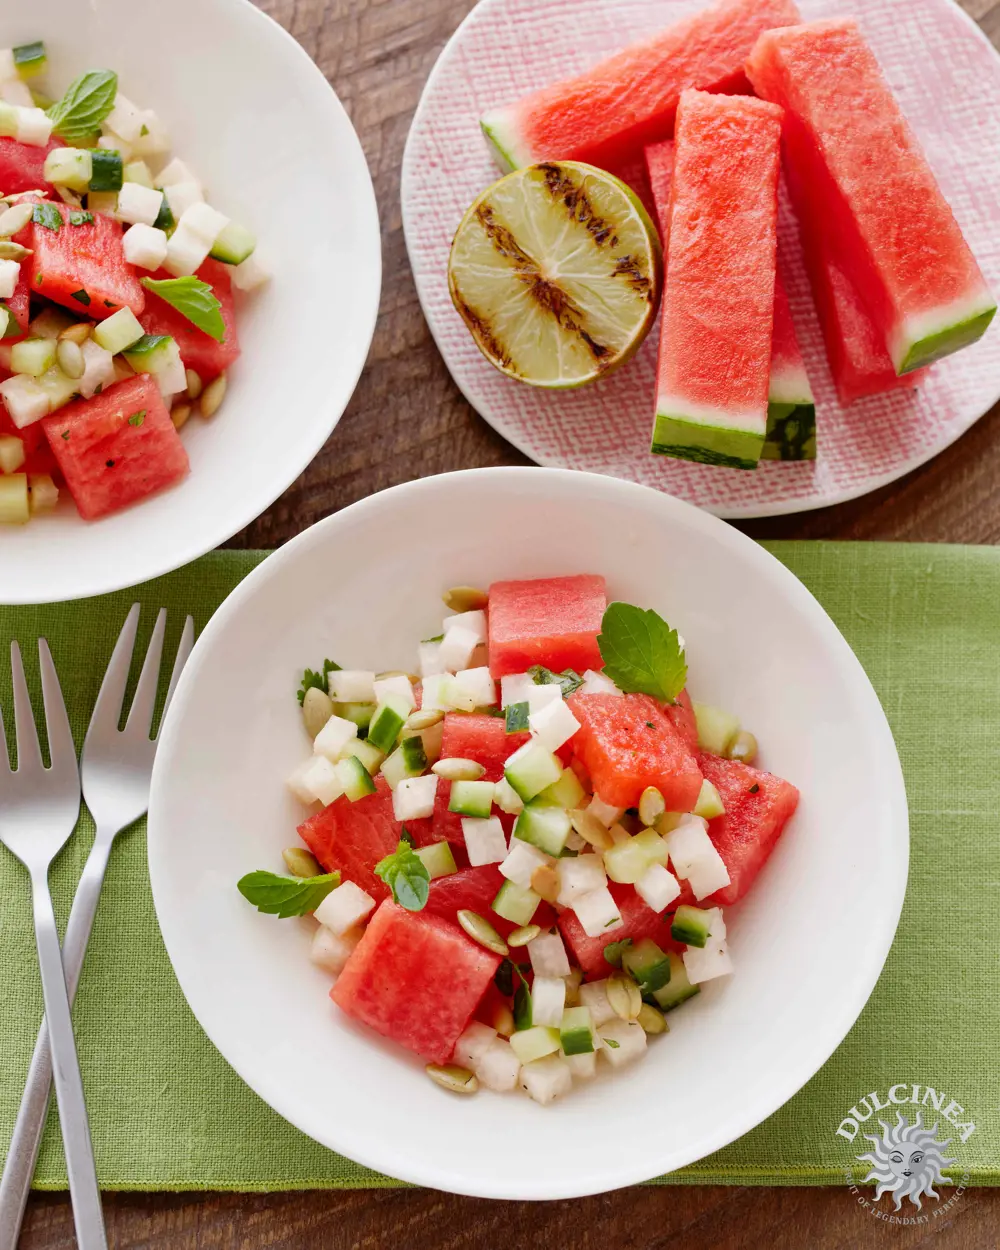 Pureheart Ginger Watermelon Salad With Grilled Lime Vinaigrette1